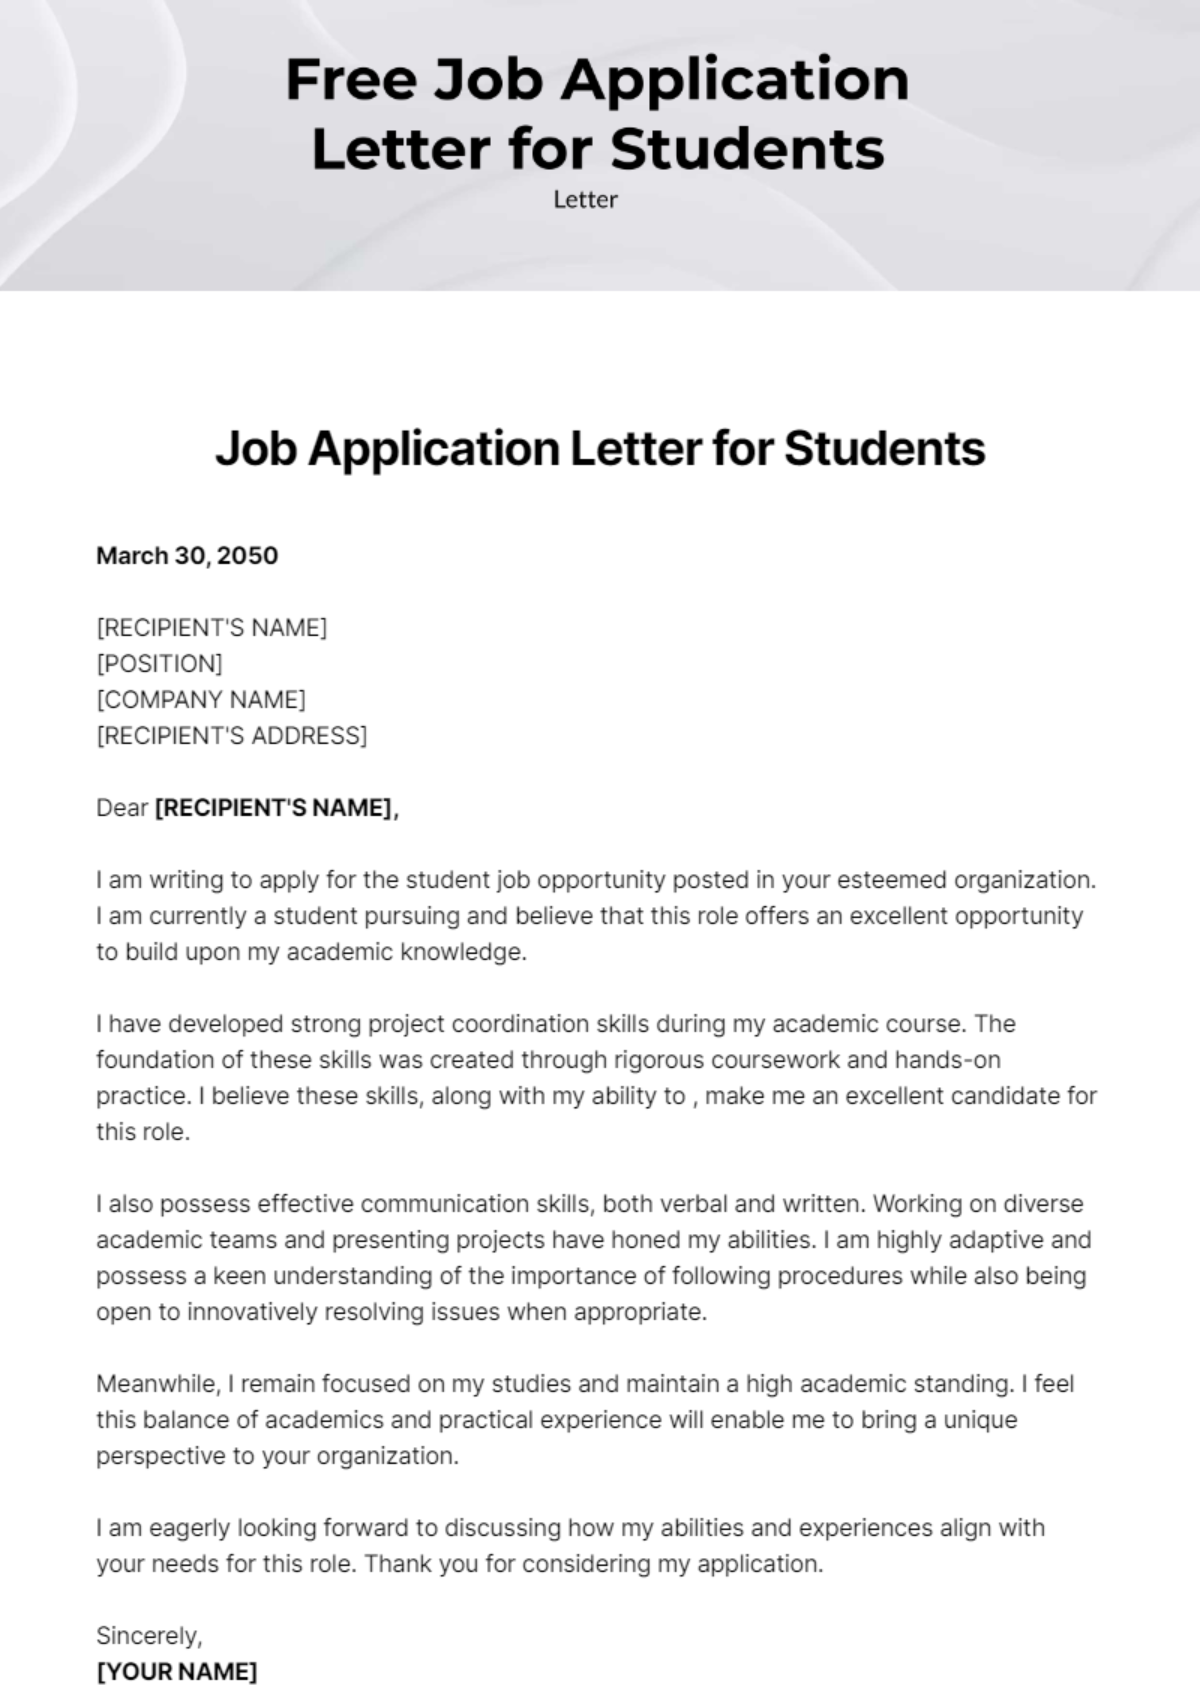 Job Application Letter for Students Template